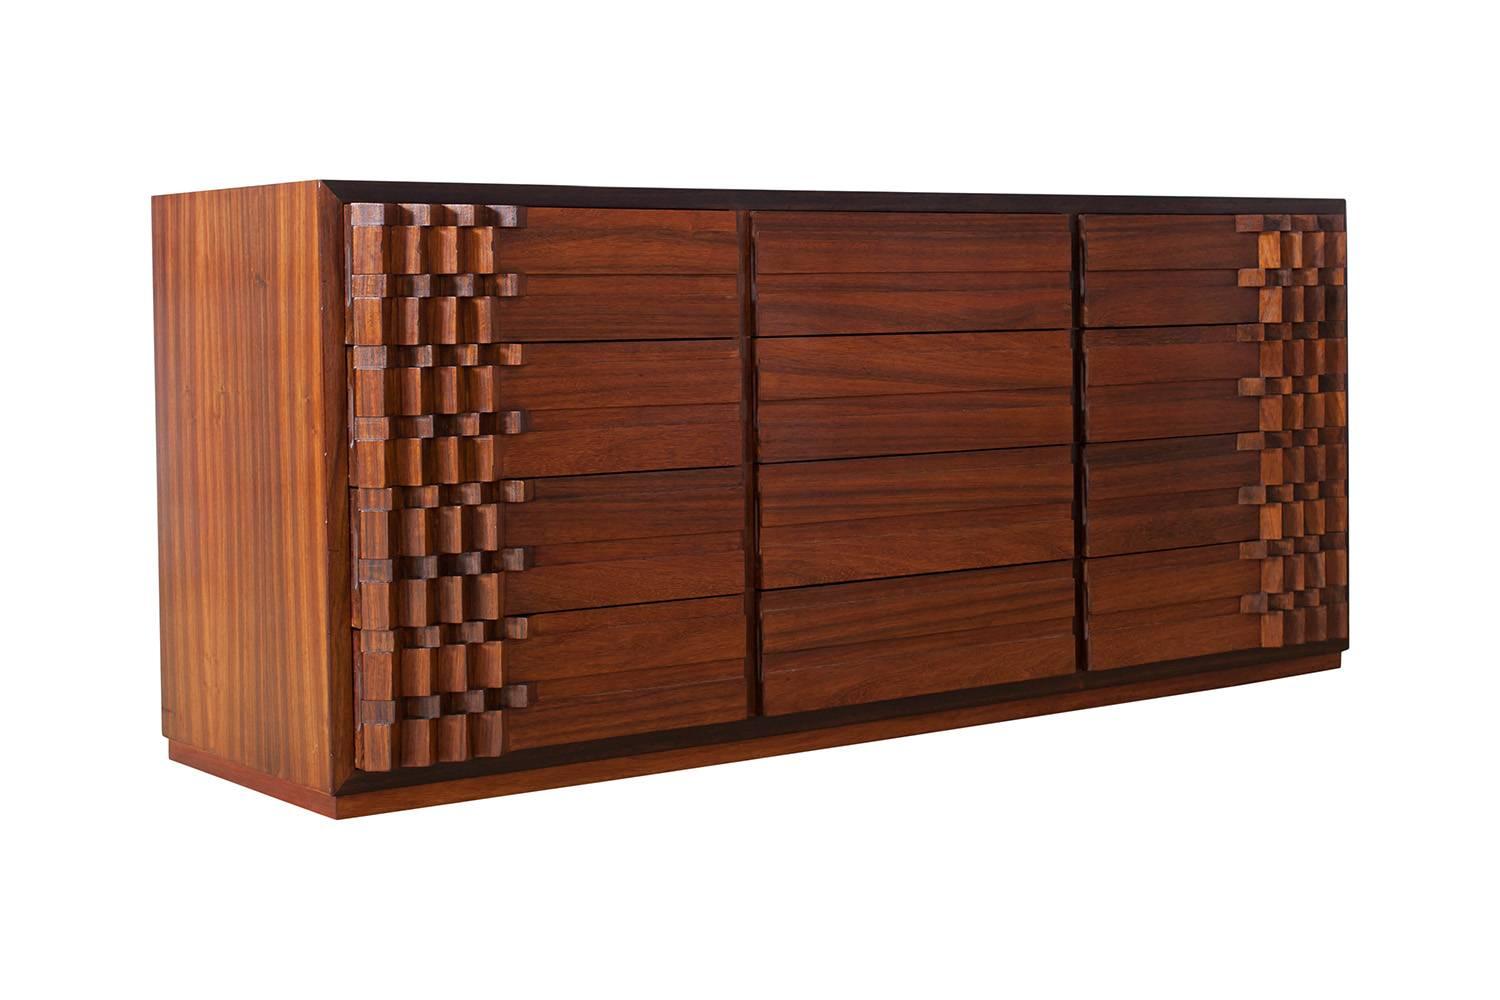 Hollywood Regency chest of drawers by Italian designer Luciano Frigerio, Italy, 1970s.
The drawers on each end of the cabinet are decorated with a complex block pattern, and give this item a light Brutalist touch. The rich color of the walnut makes